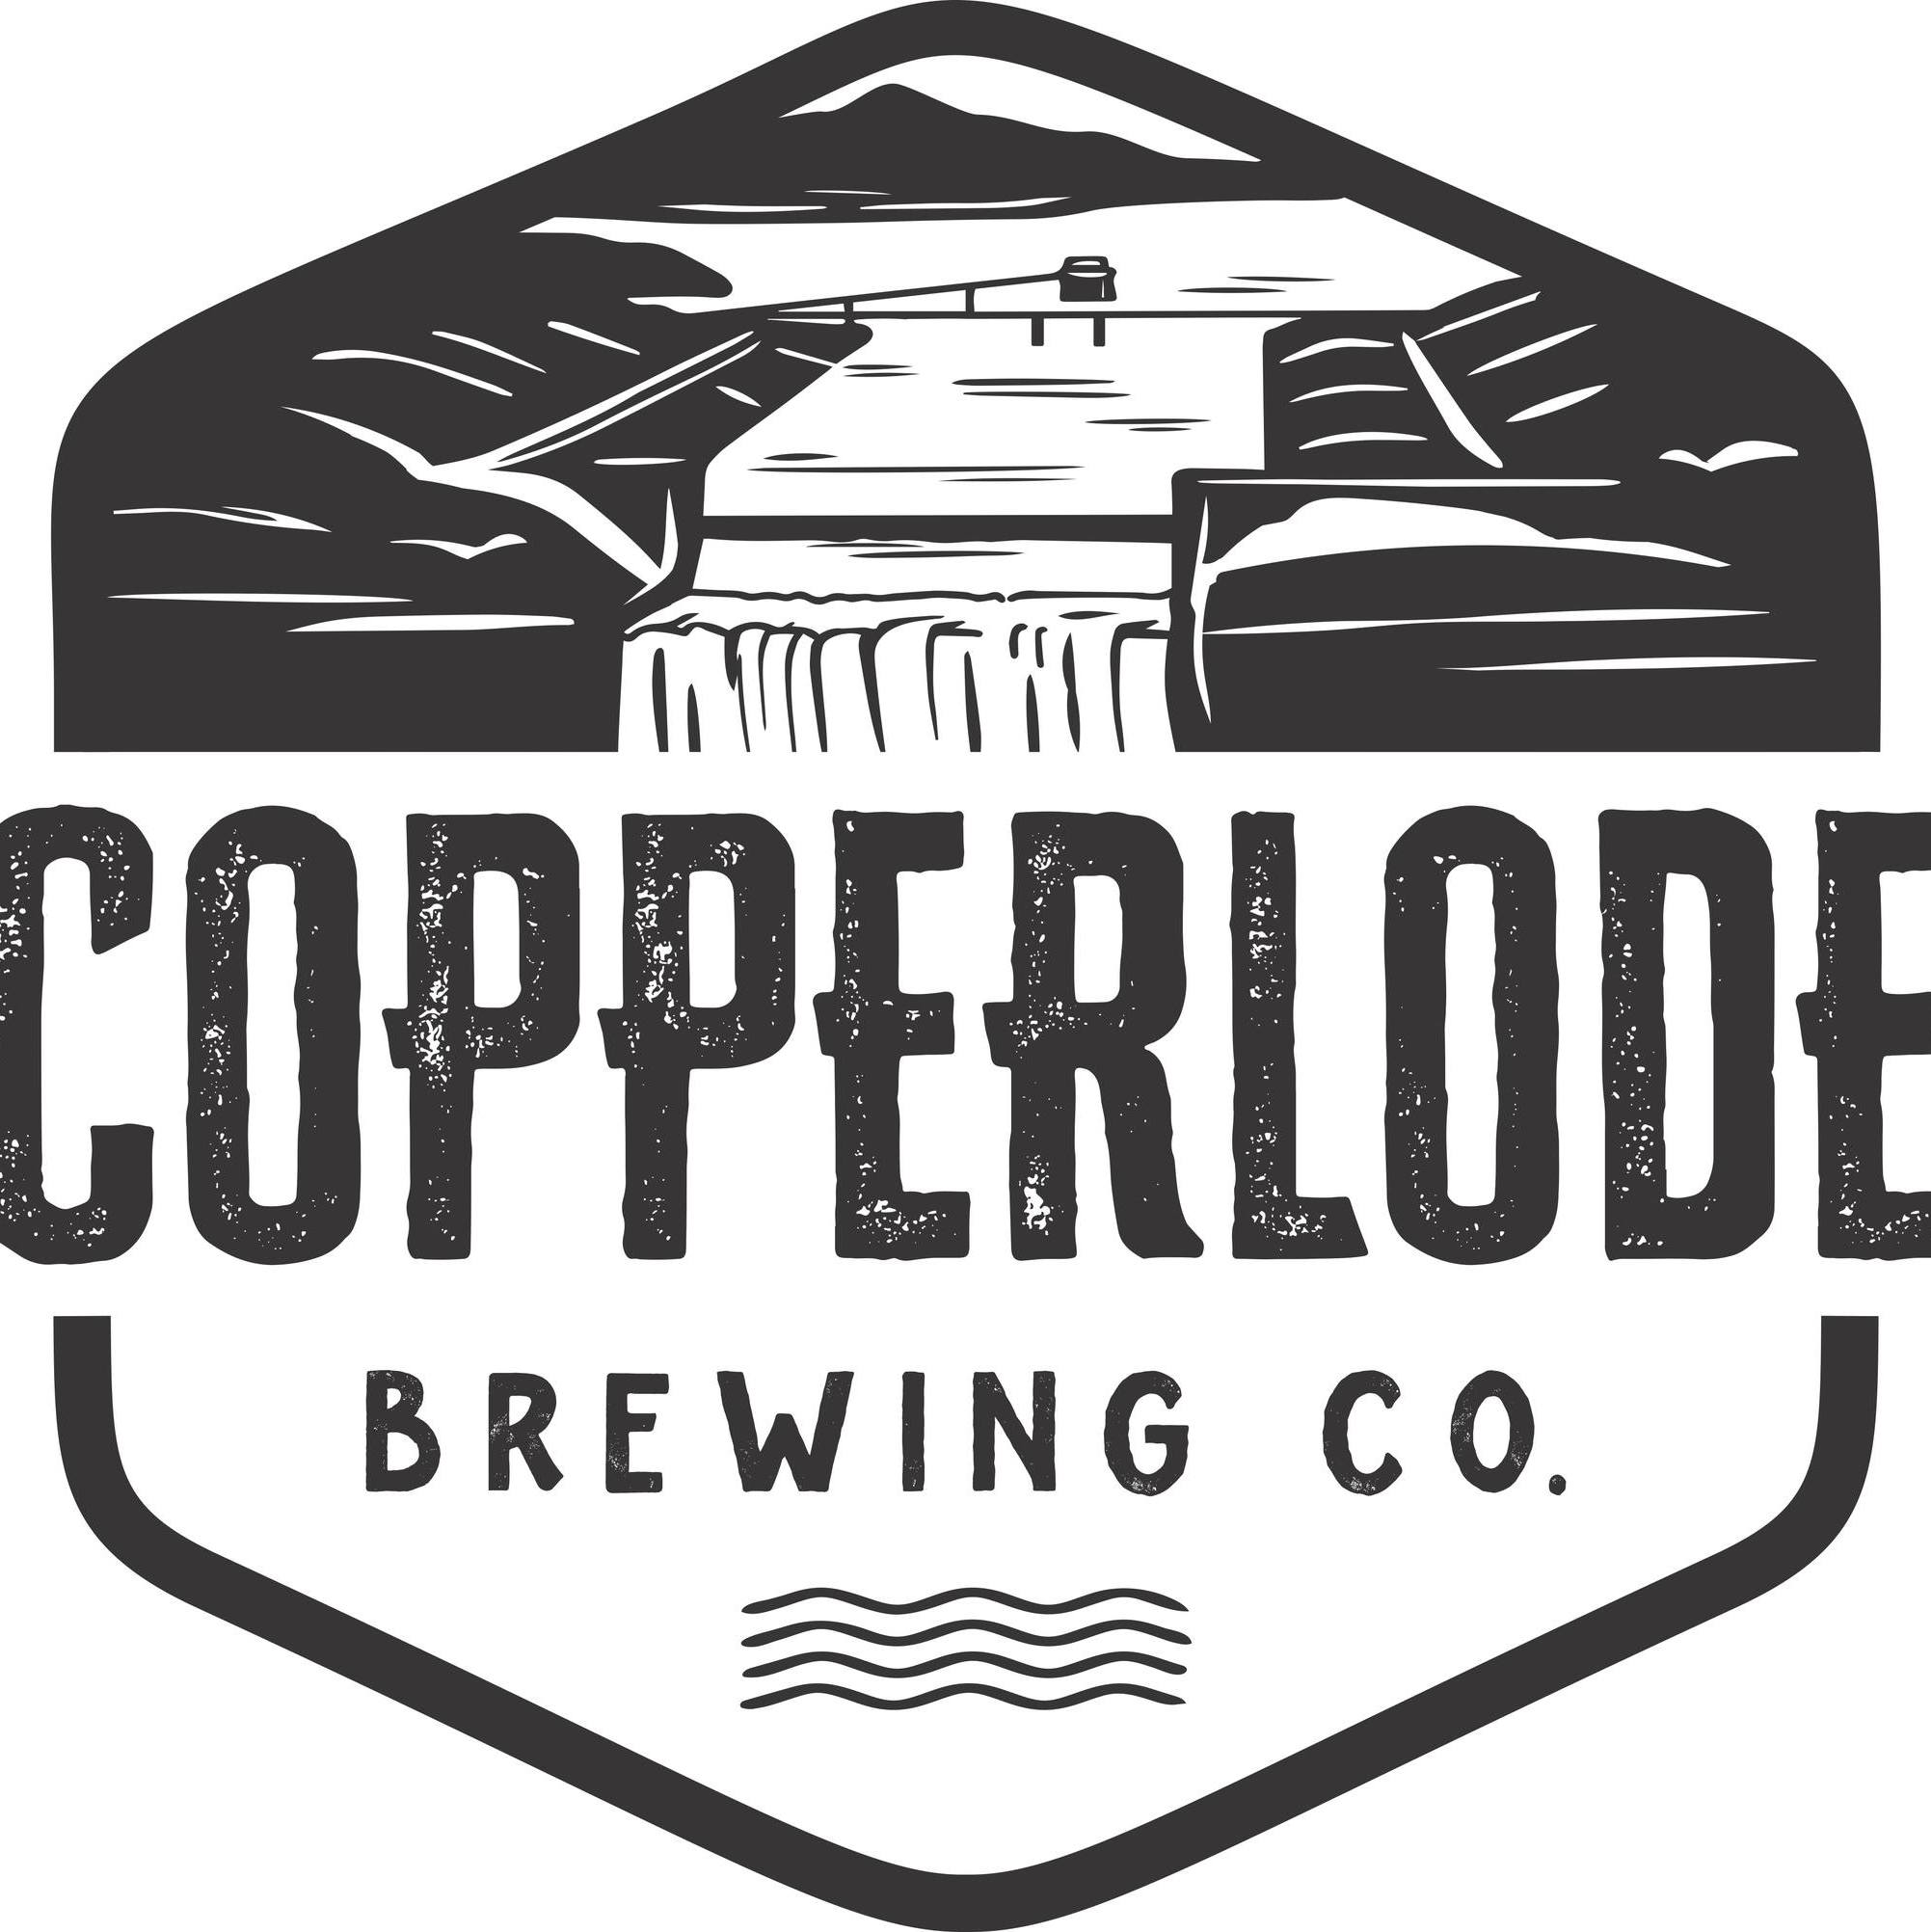 Copperlode Brewery Co.